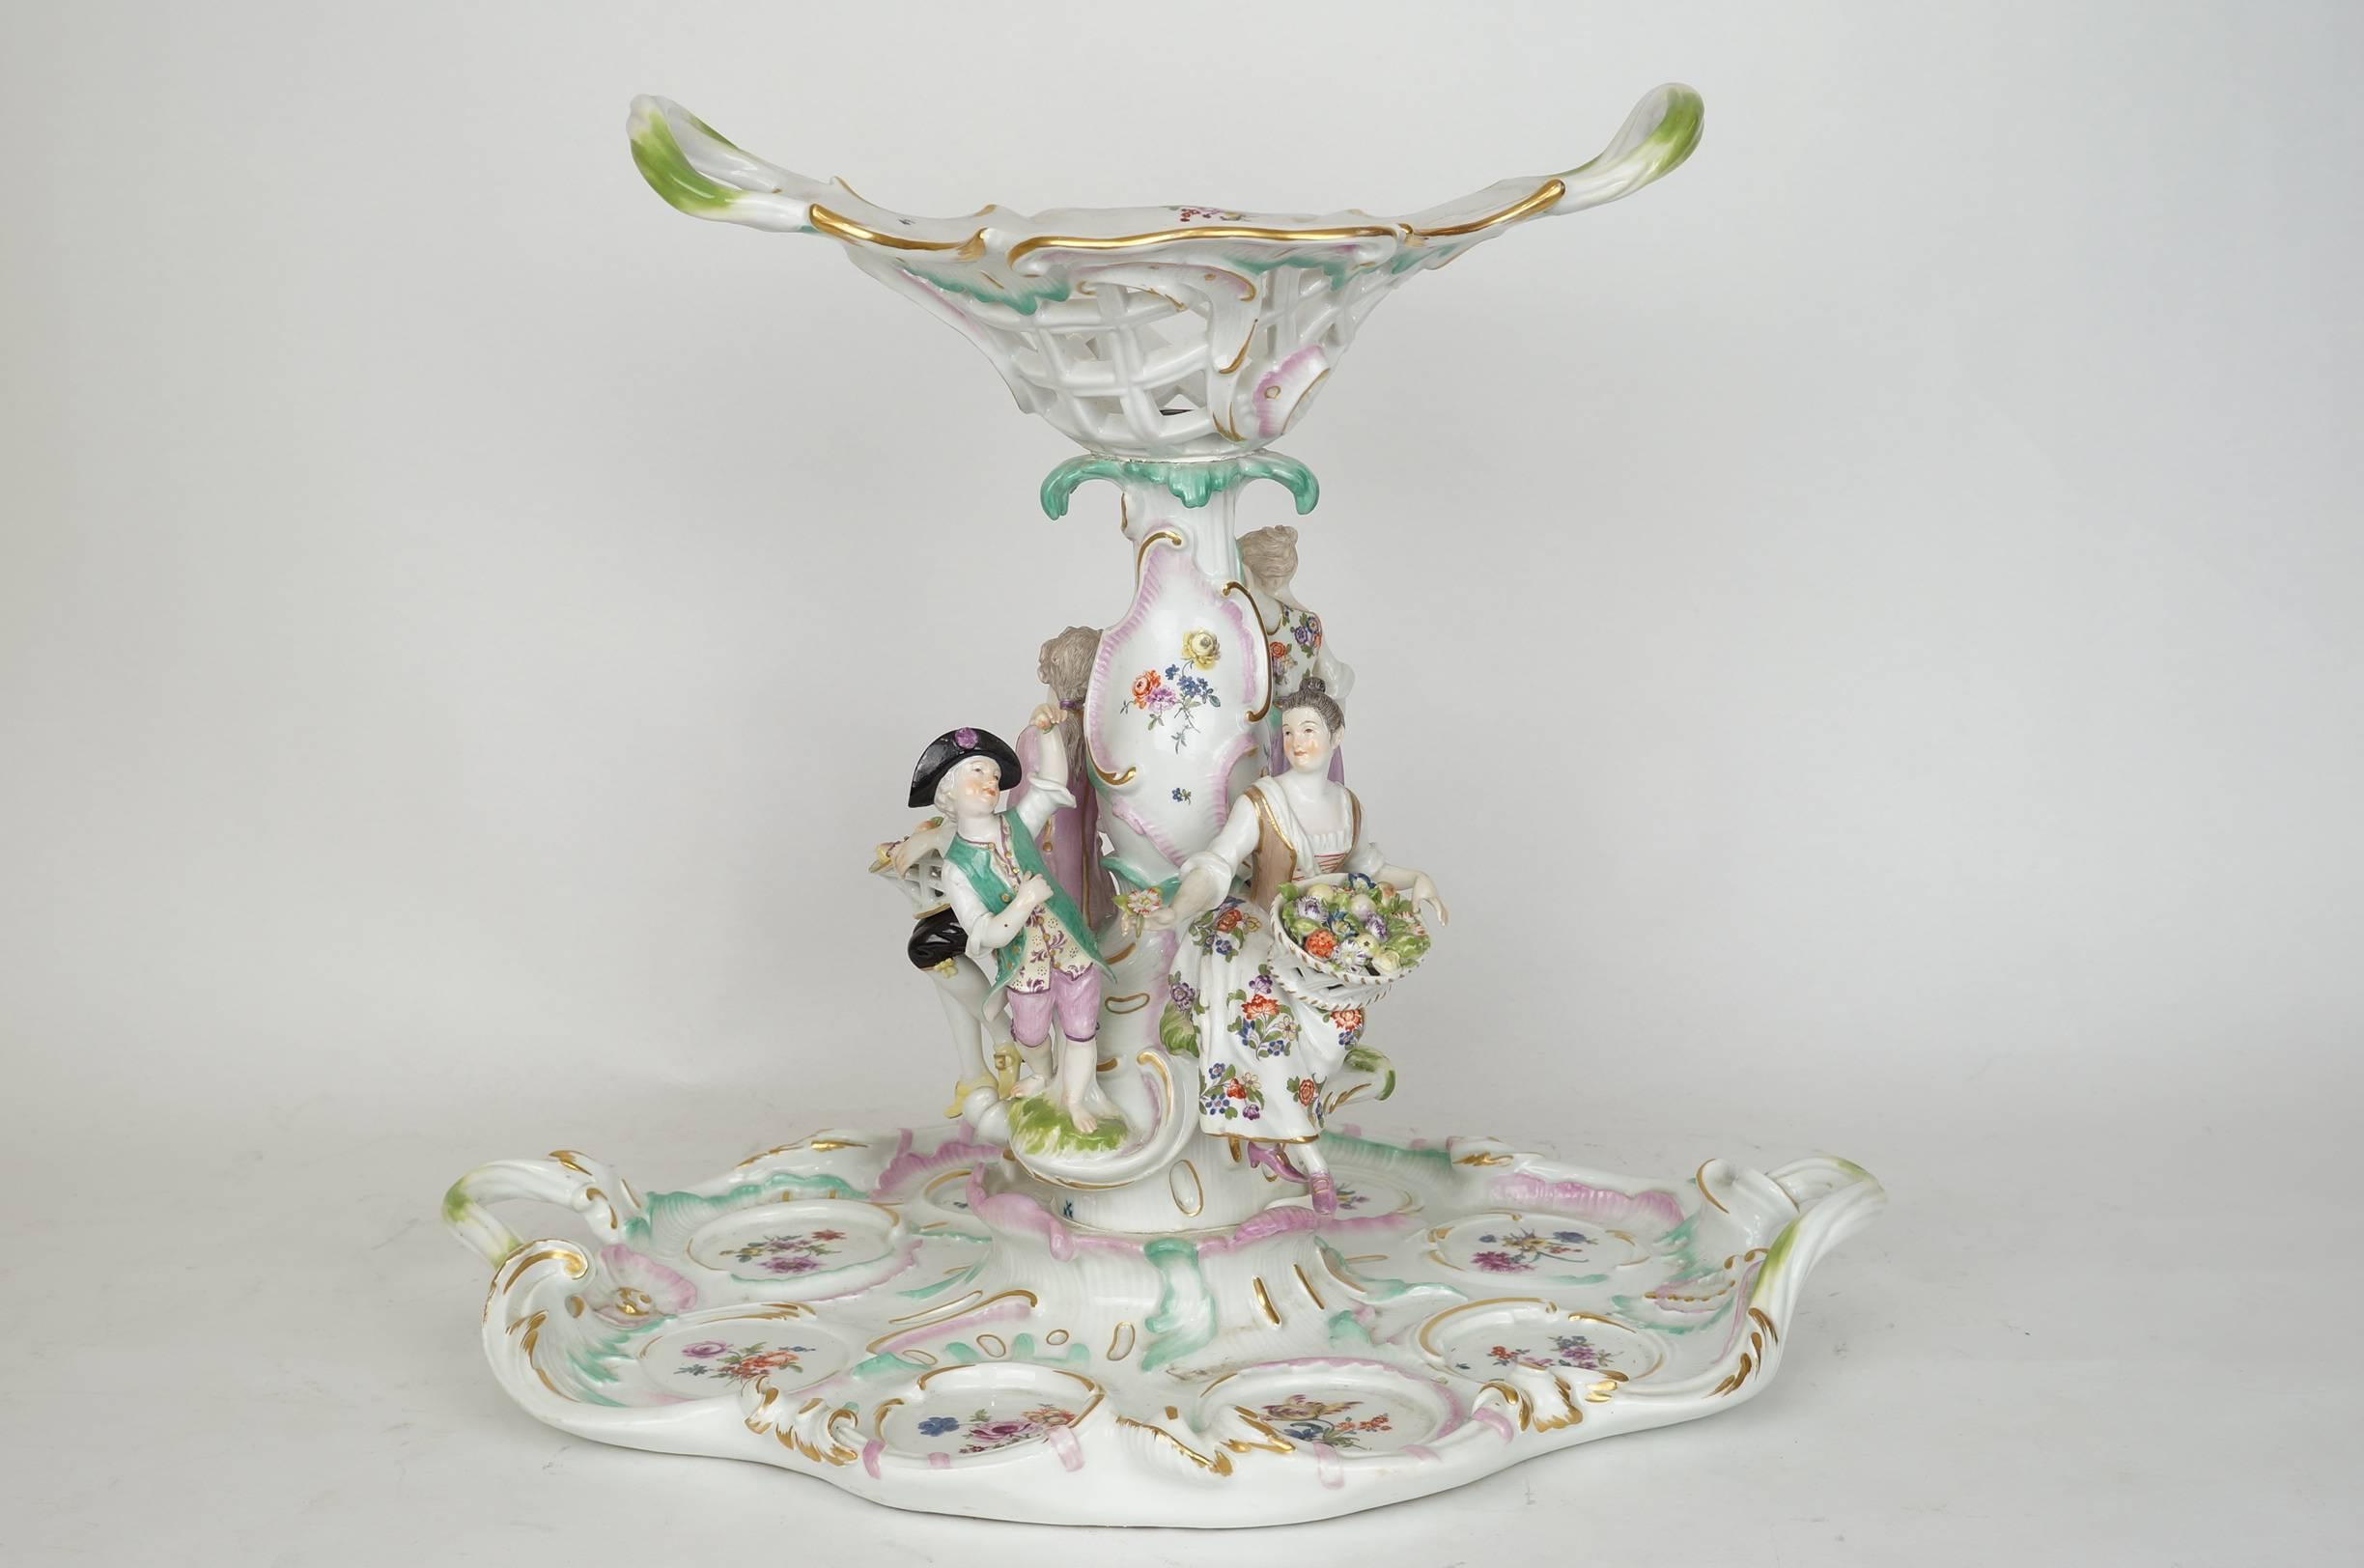 Important Meissen Figural Centerpiece with Basket on Top and Cherubs Around with Floral decoration
Meissen Blue Crossed Sword Marking on Bottom of the Base
Stock Number: DA110